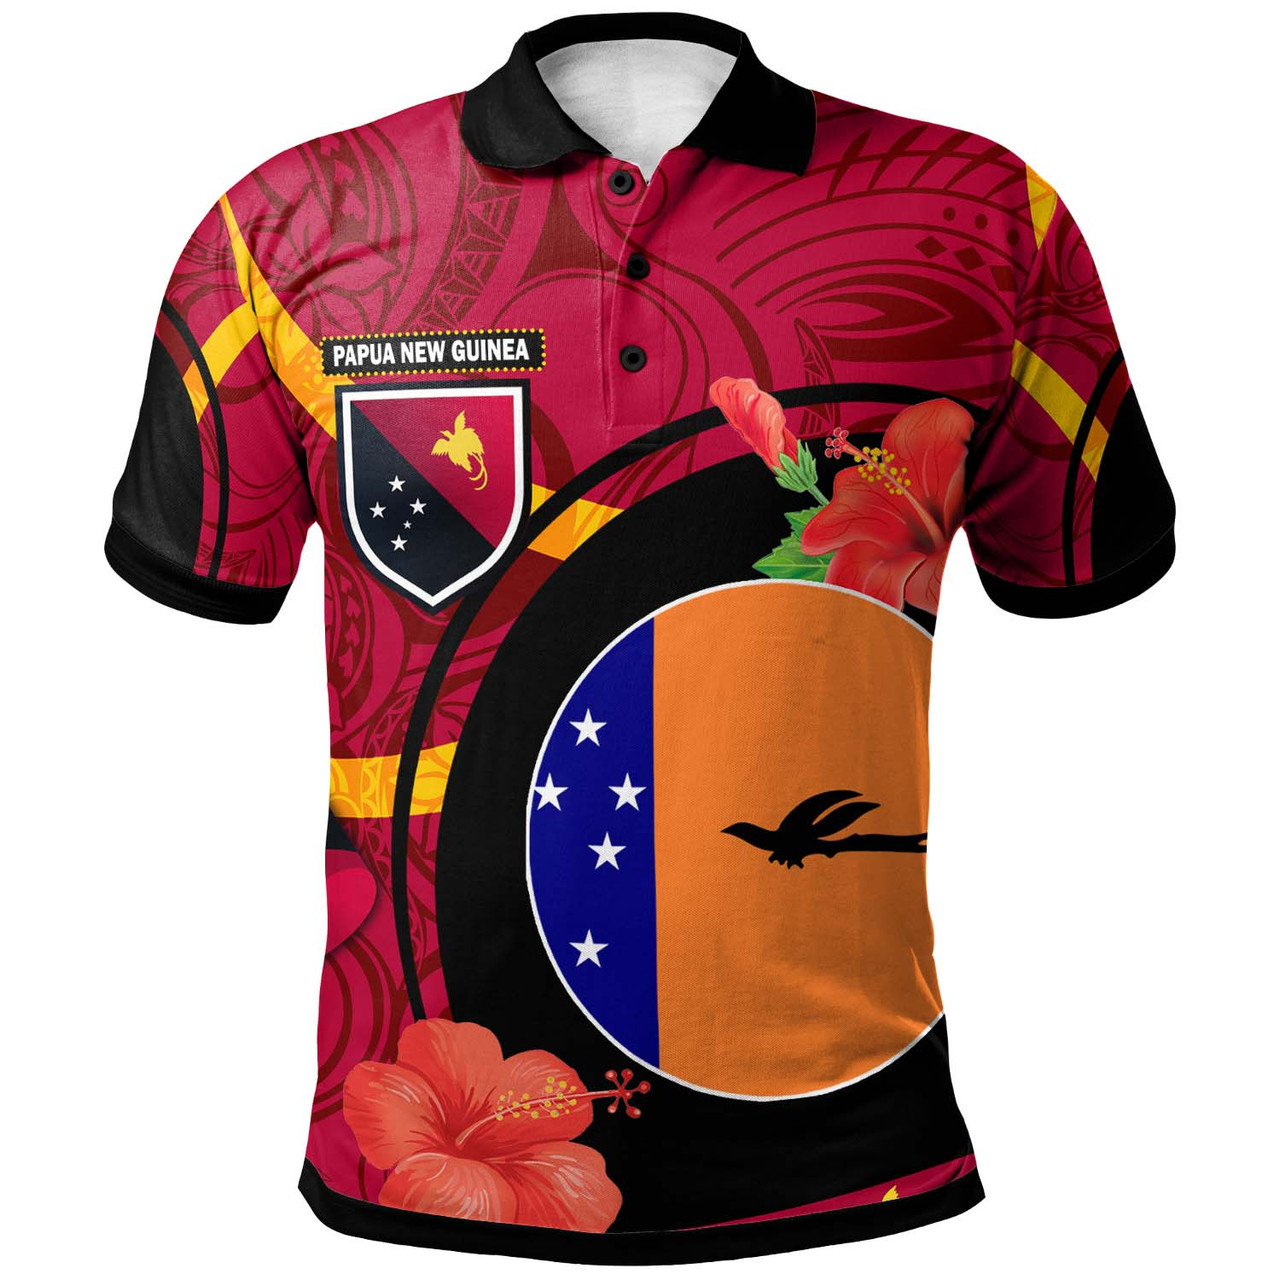 Papua New Guinea Polo Shirt -New Ireland Flag of PNG with Hibicus and Polynesian Culture Polo Shirt